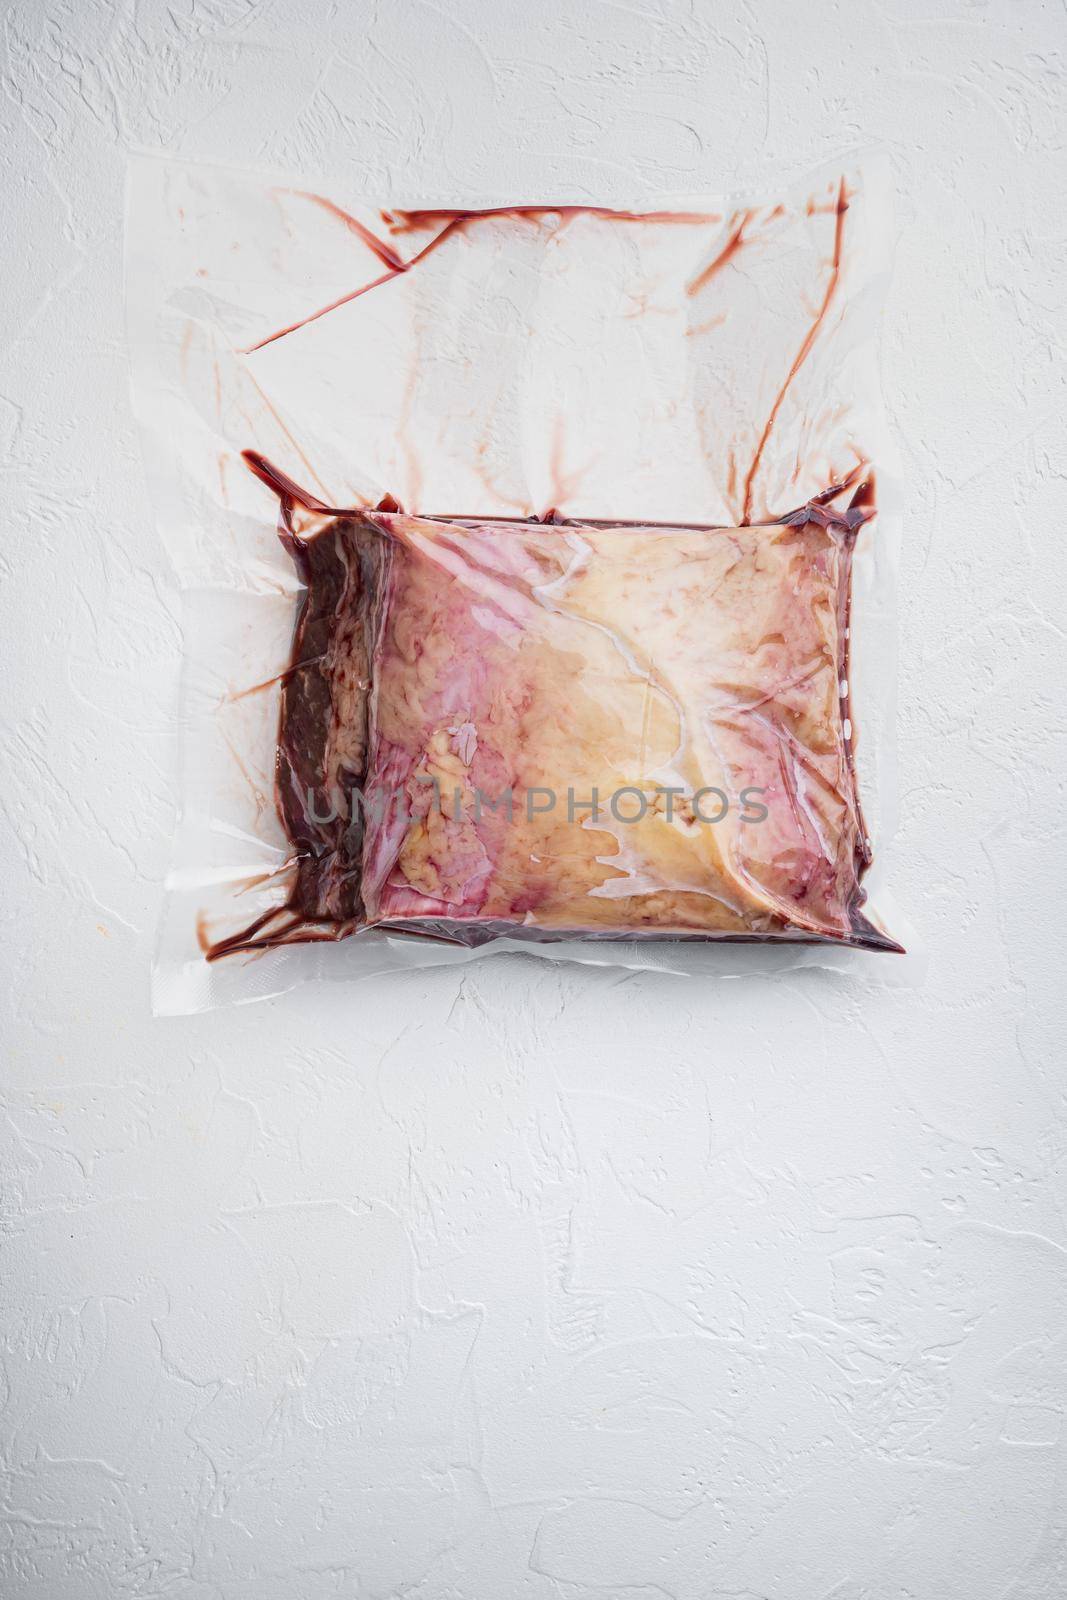 Top sirloin beef cut in plastic pack, on white background, top view, with copy space for text by Ilianesolenyi